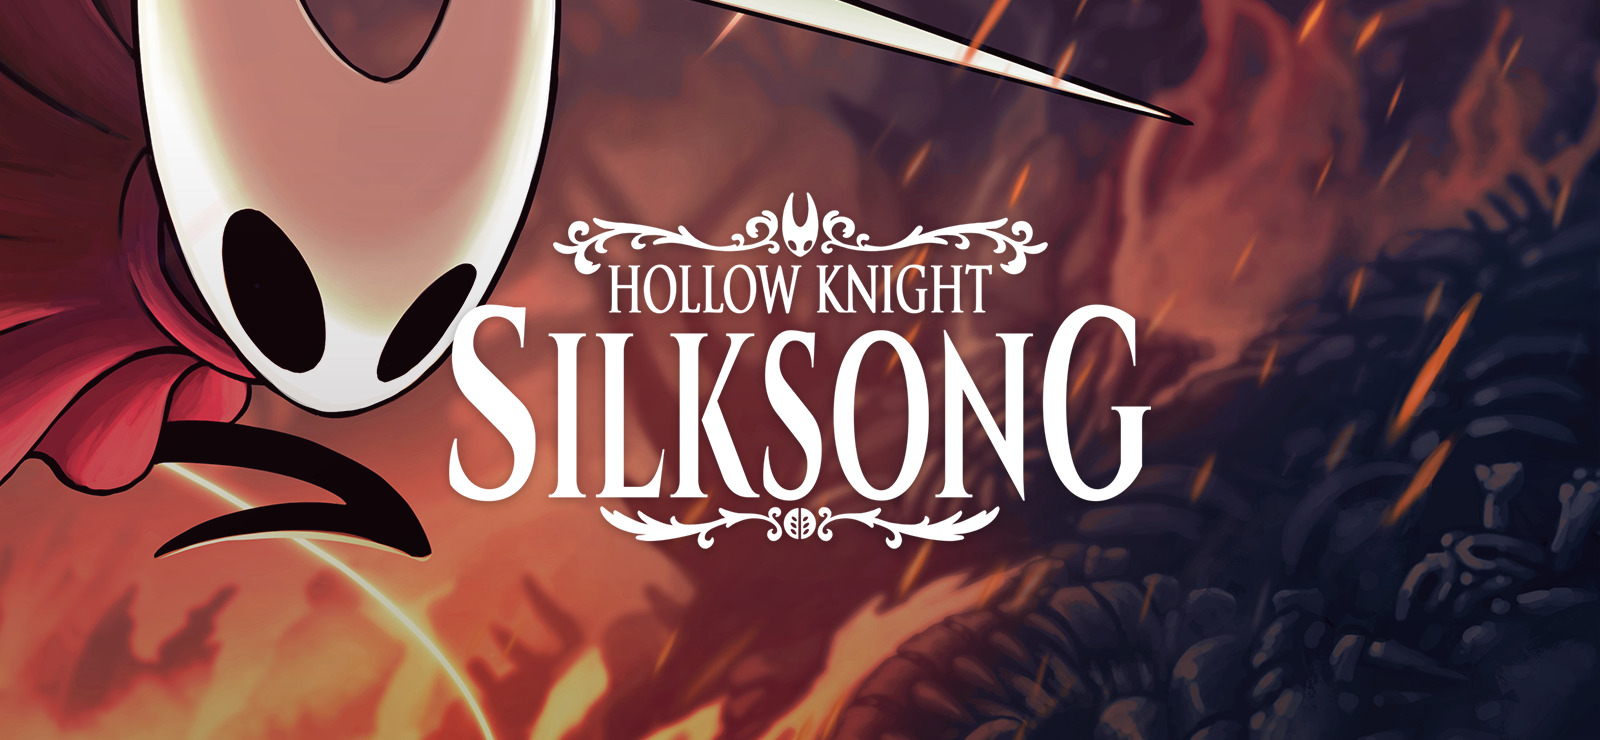 for ipod download Hollow Knight: Silksong